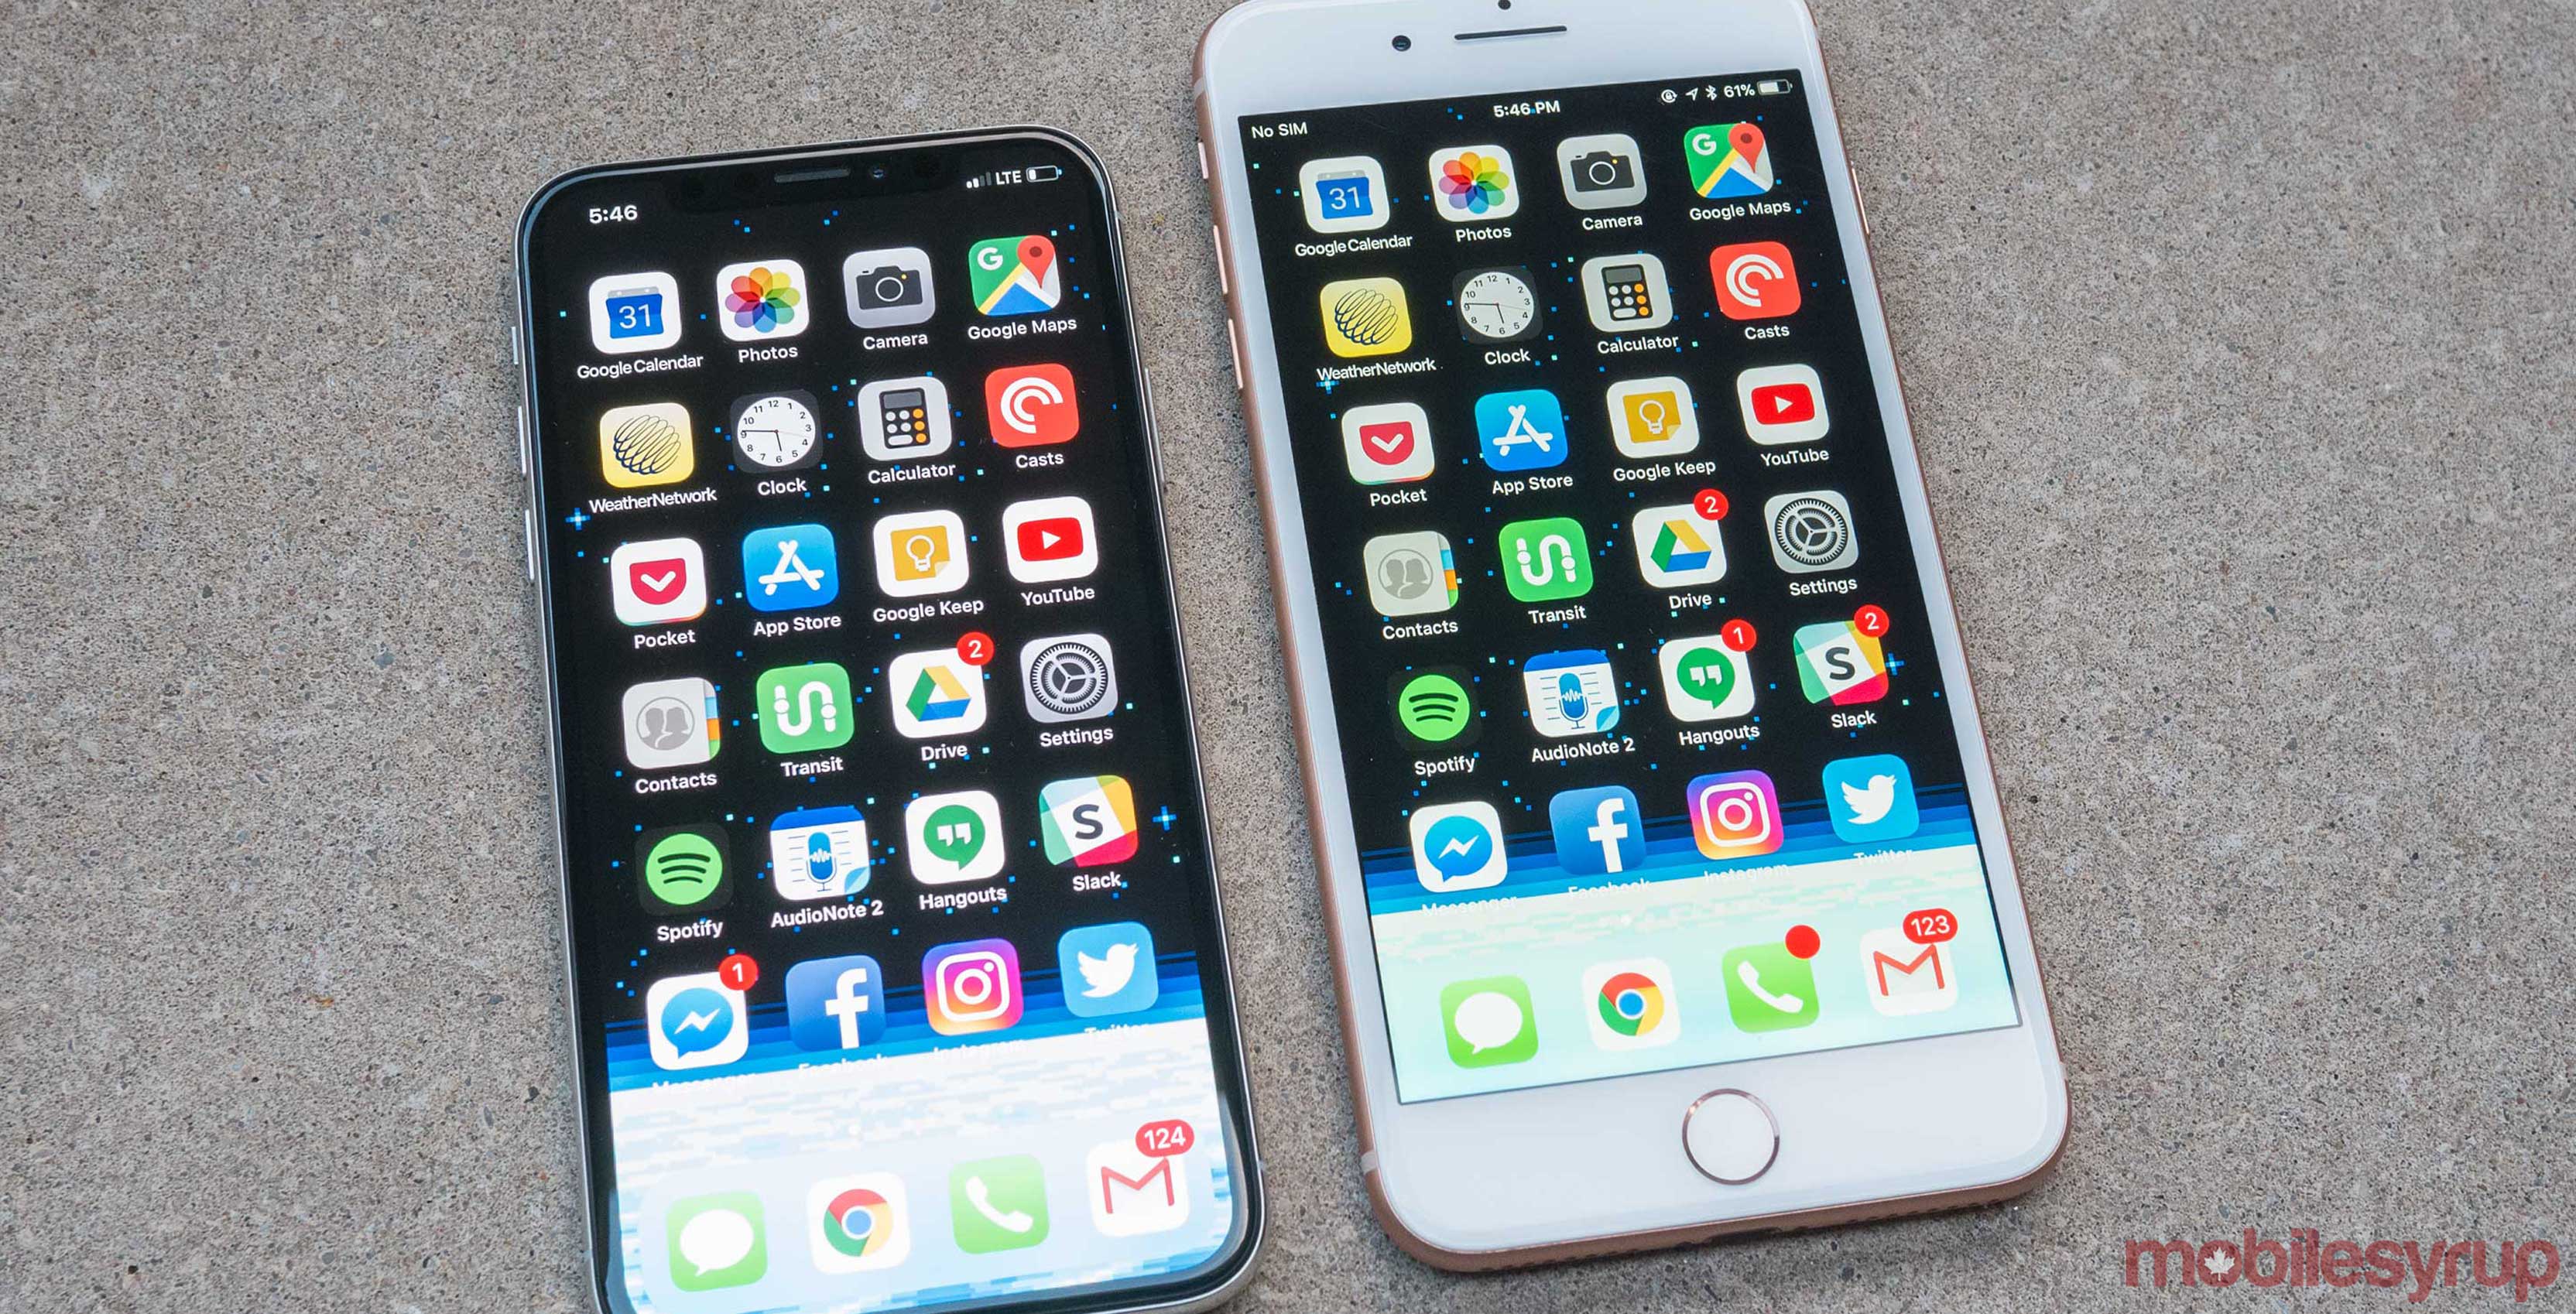 the iPhone X compared with the iPhone 8 Plus